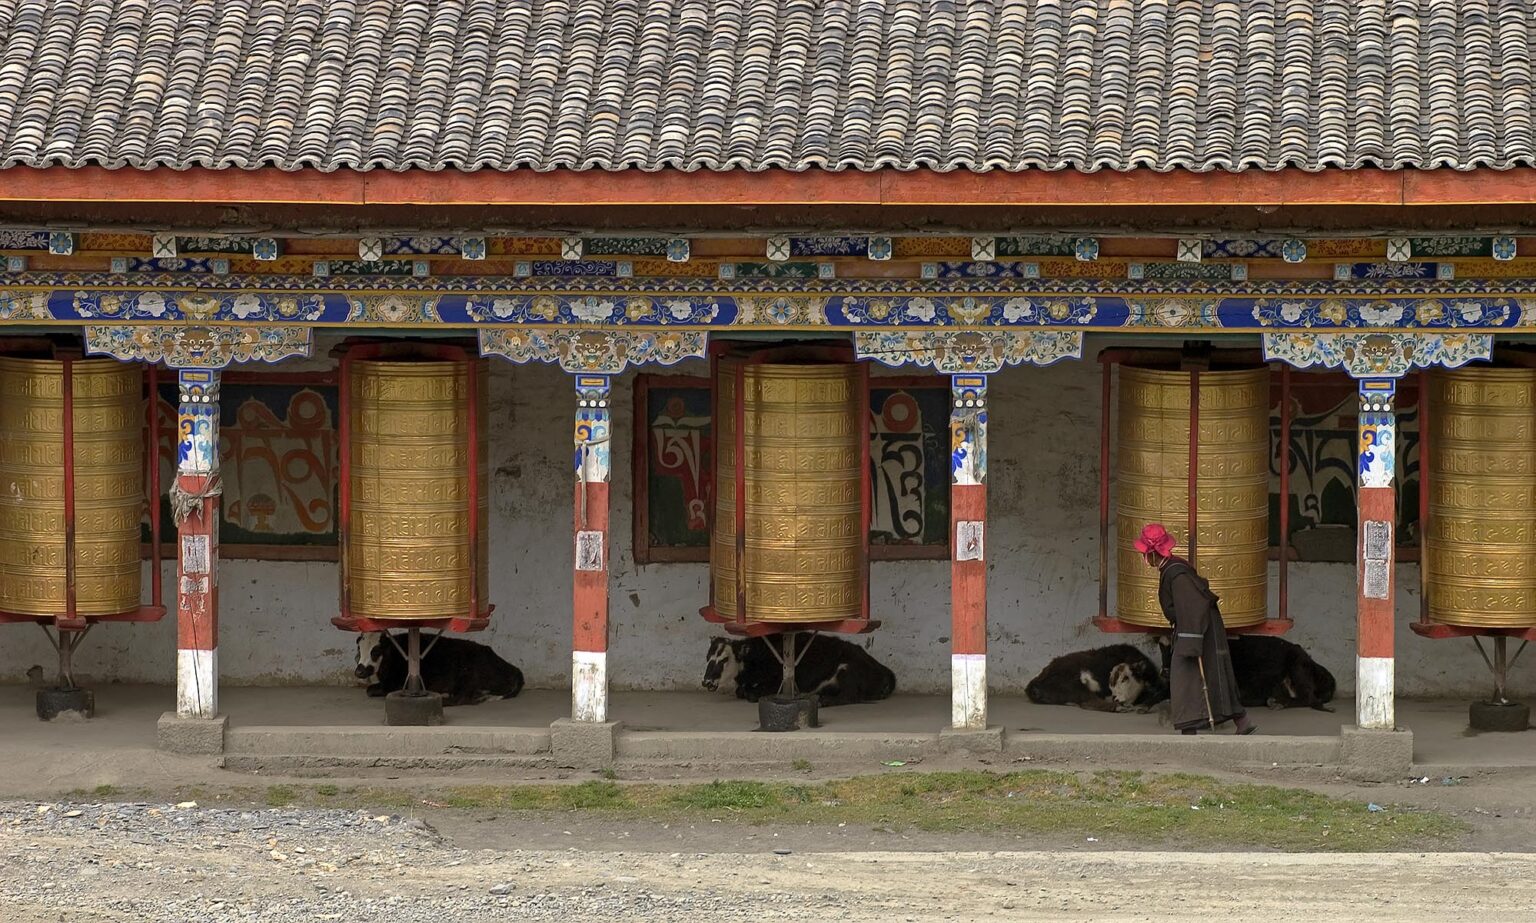 Giant prayer wheels and yaks at the Buddhist Monastery of Tagong (Lhagang) - Kham, Sichuan Province, China, (Tibet)